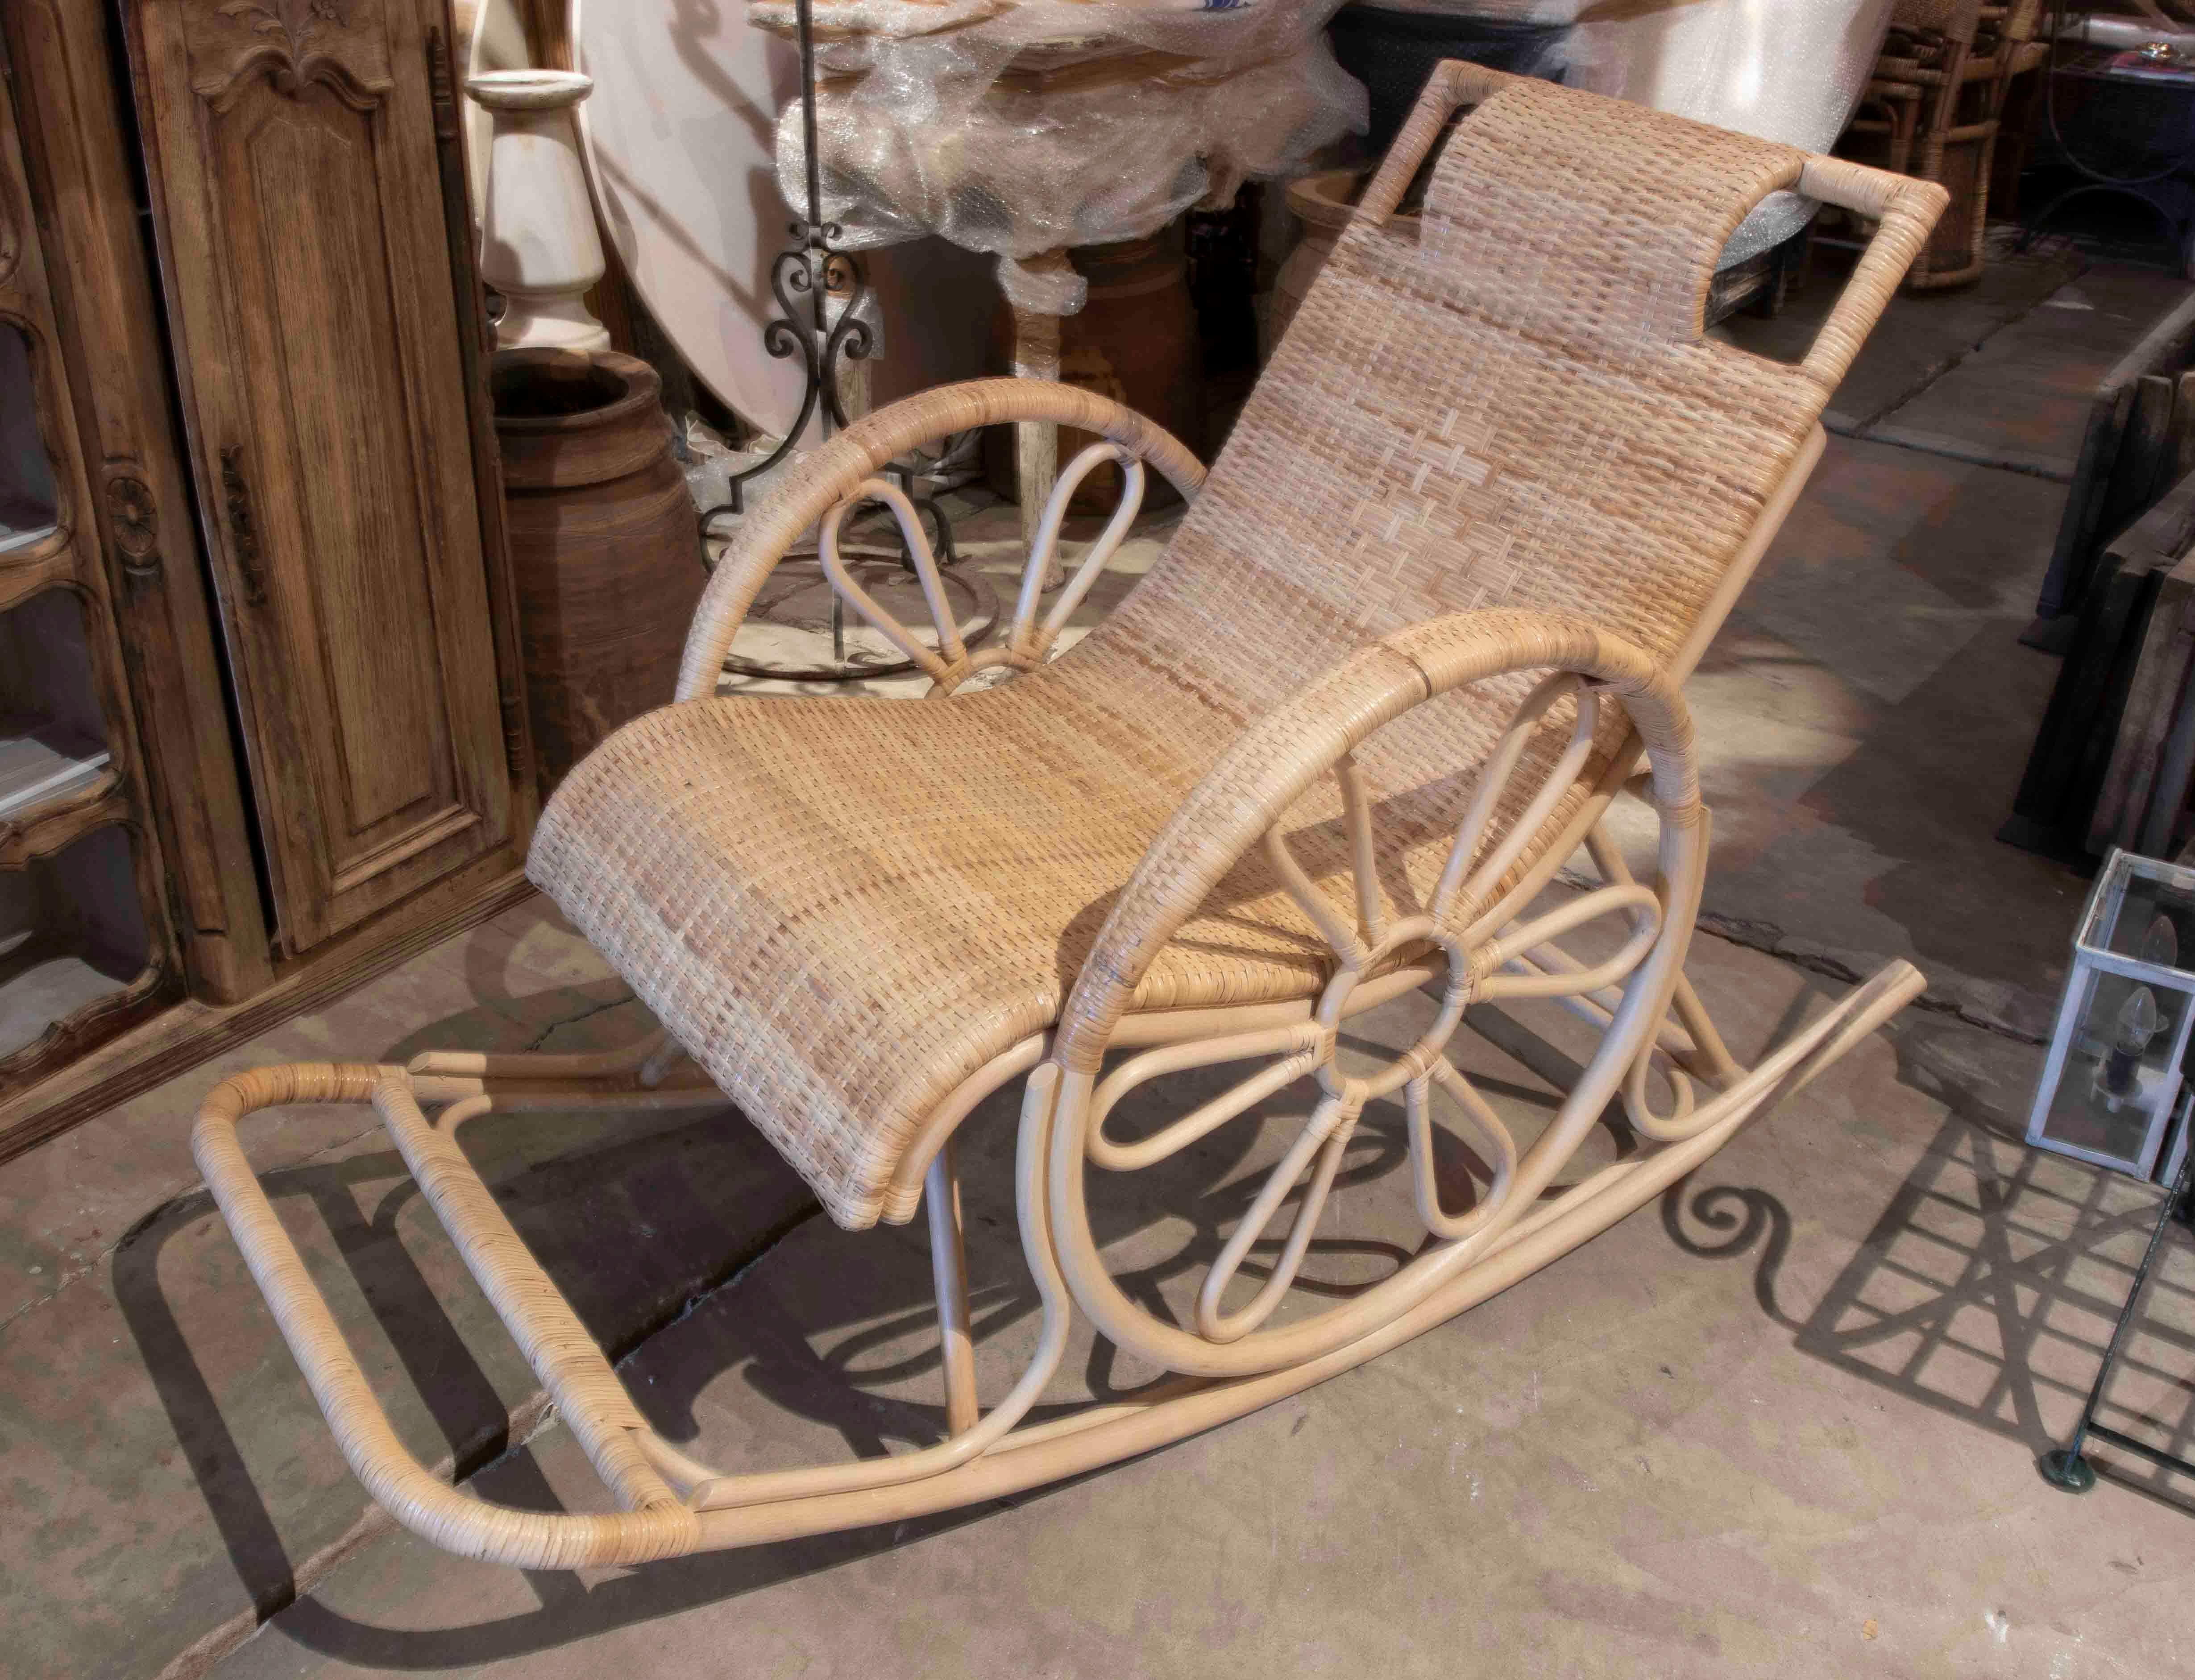 European Handmade Wicker Rocking Chair with Armrests For Sale